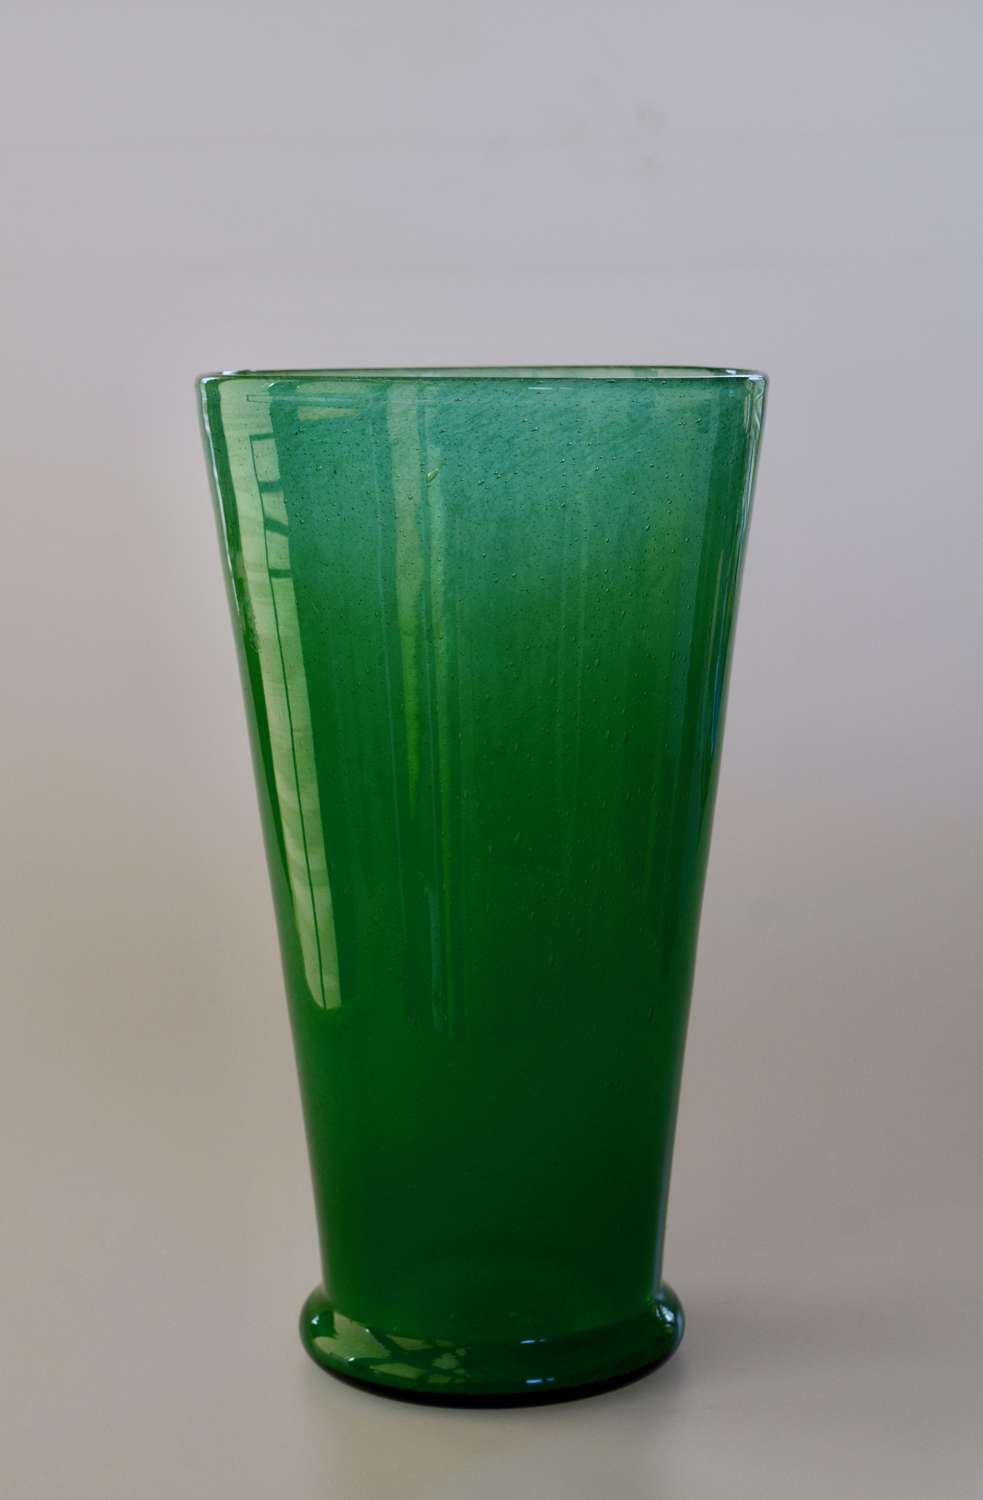 Stevens and Williams cloudy green vase